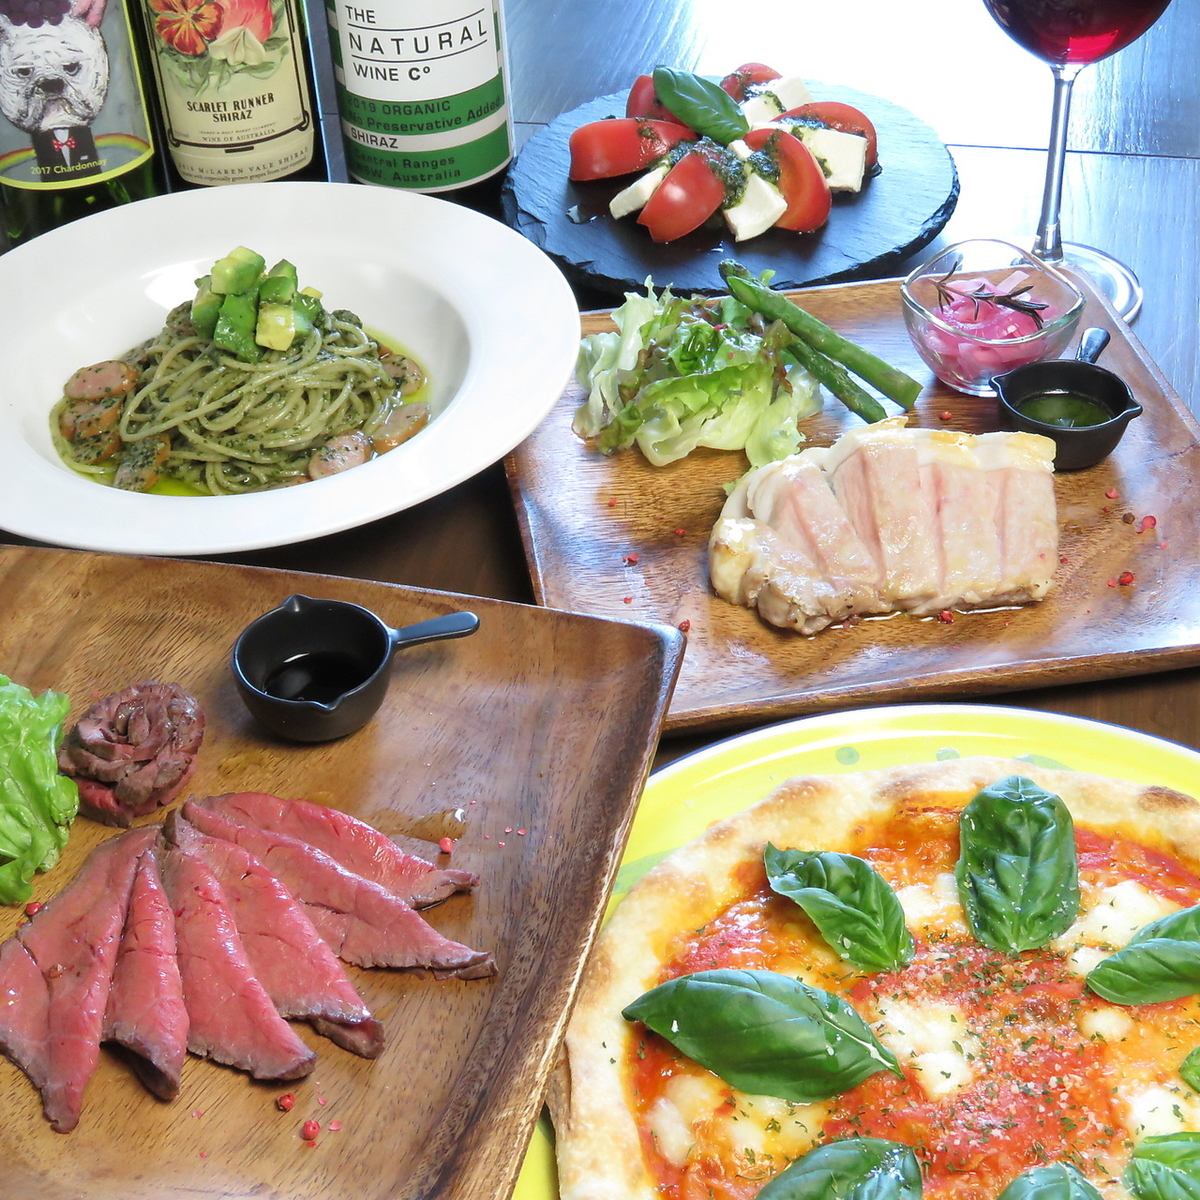 A restaurant where you can enjoy authentic Italian cuisine with a focus on ingredients, ingredients, and base.